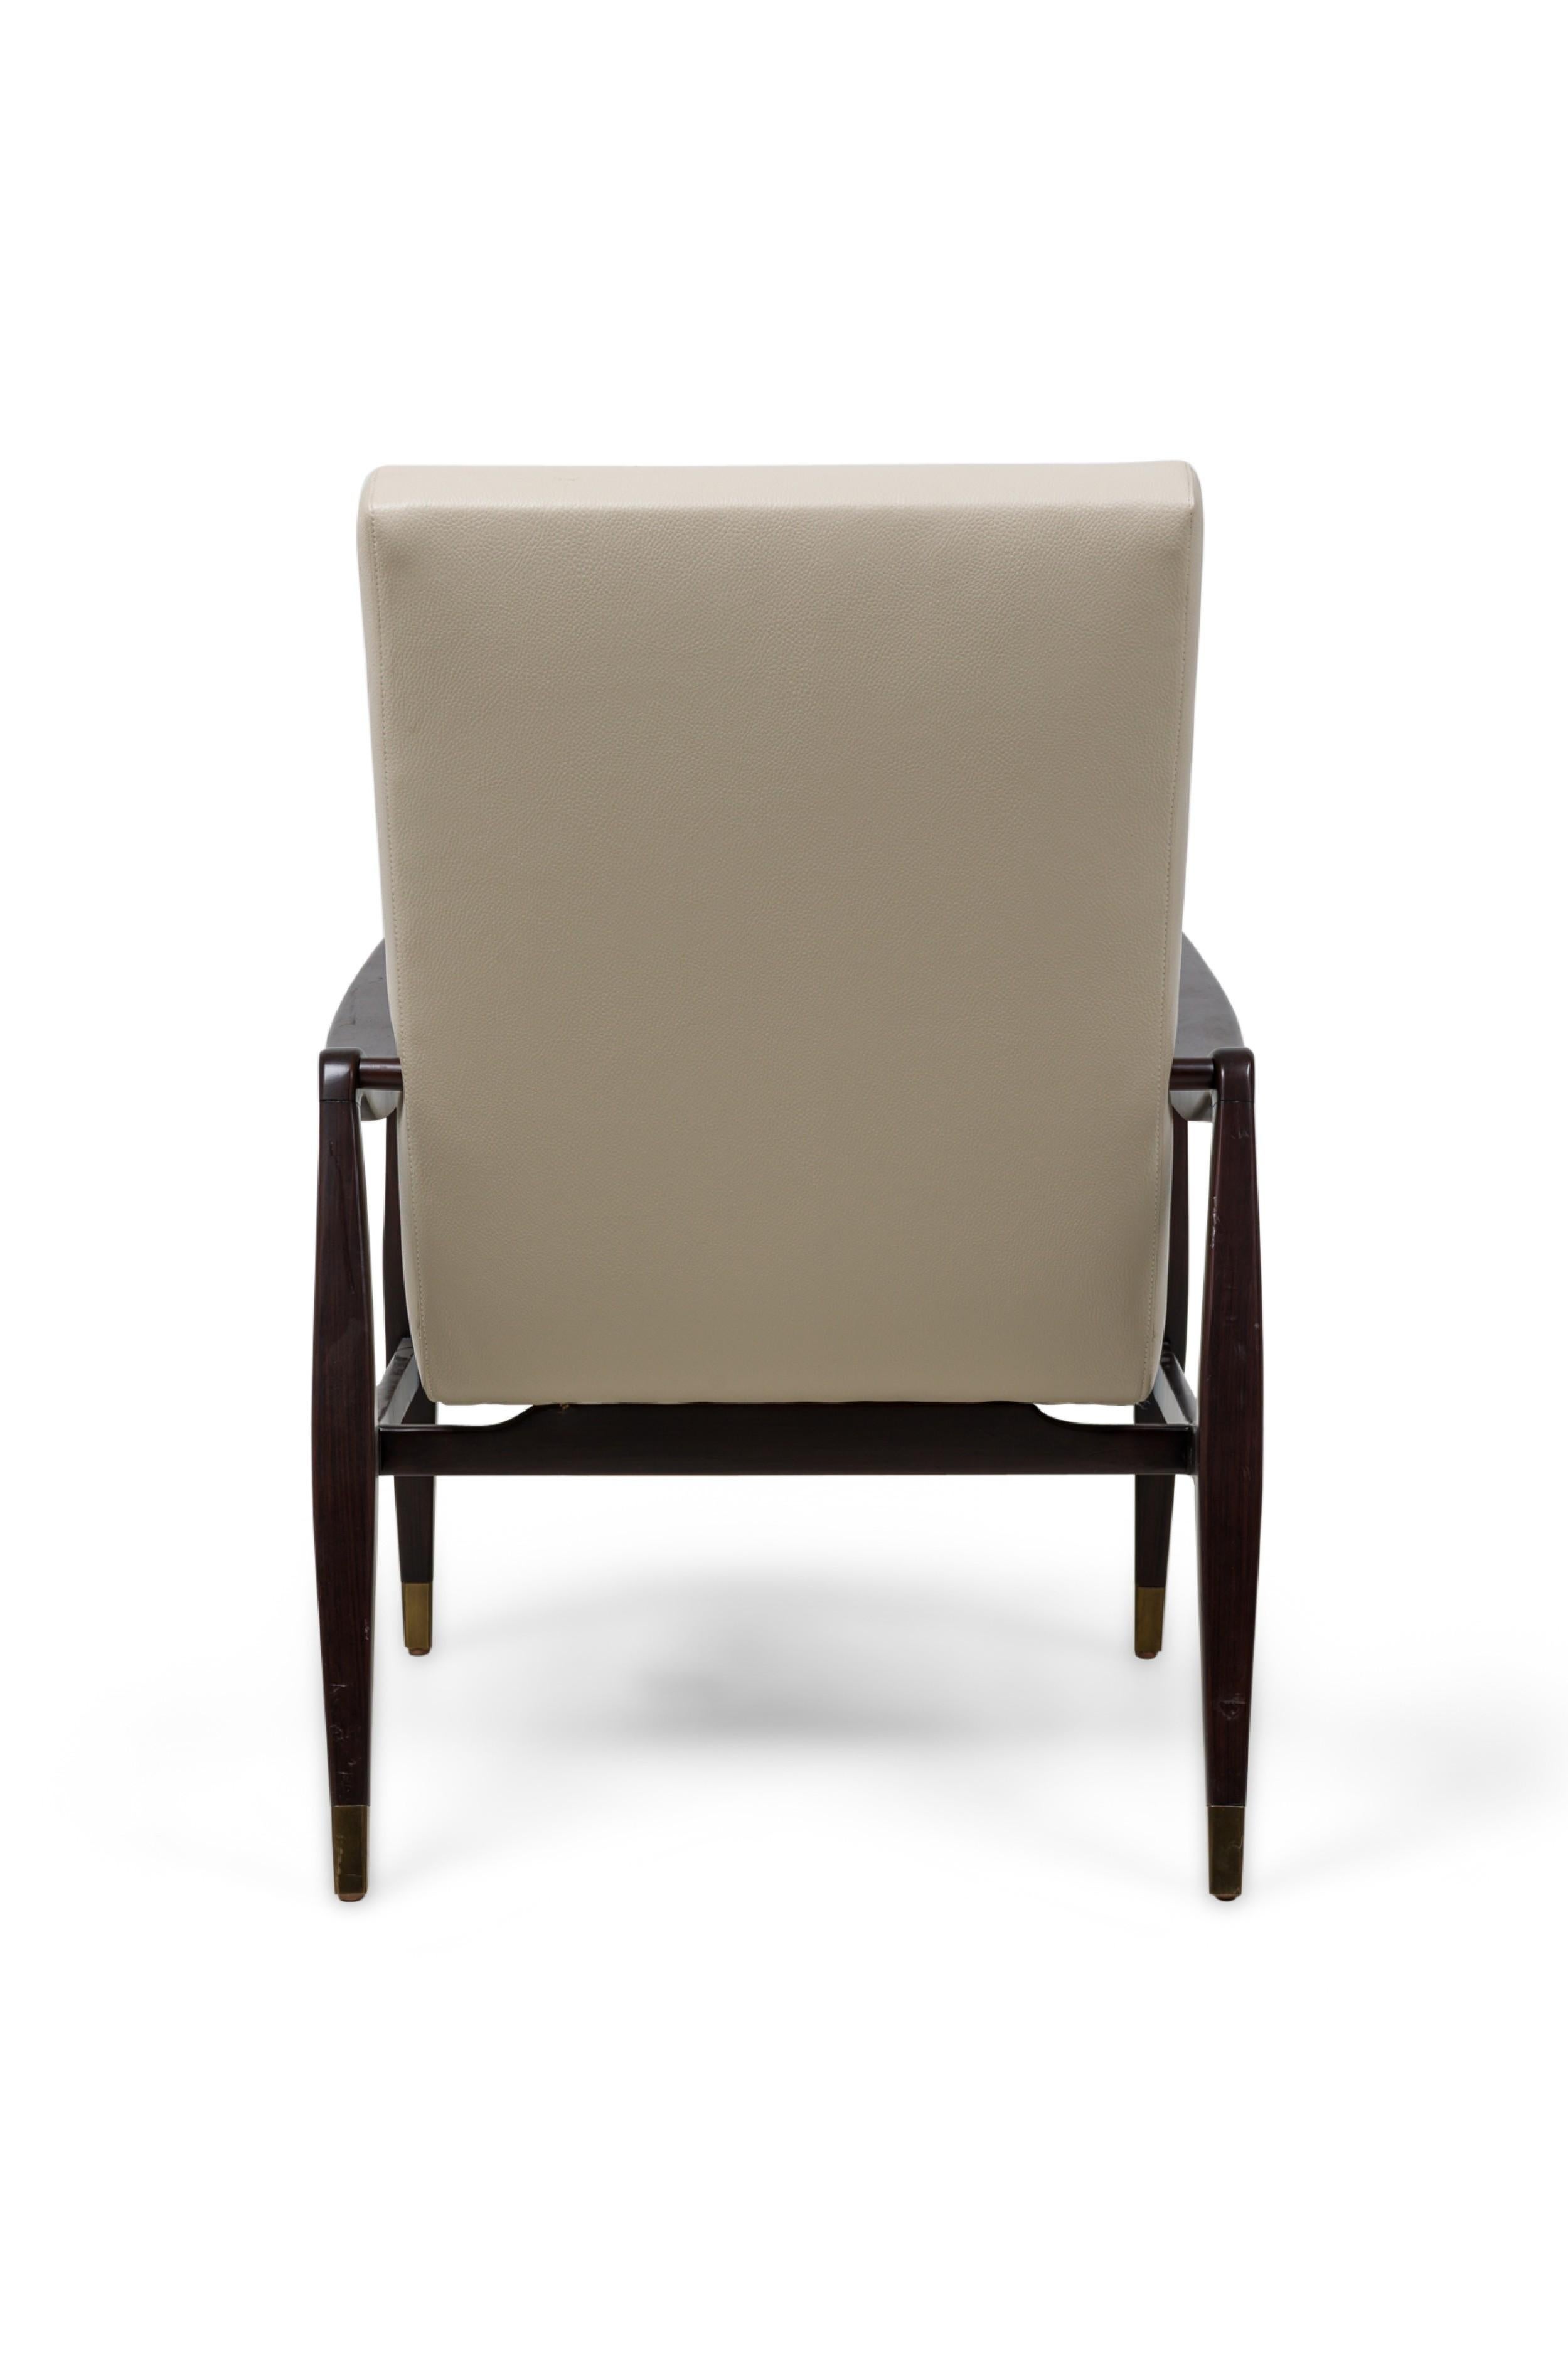 20th Century Pair of Contemporary American Beige Pebbled Leather Upholstered Armchairs For Sale